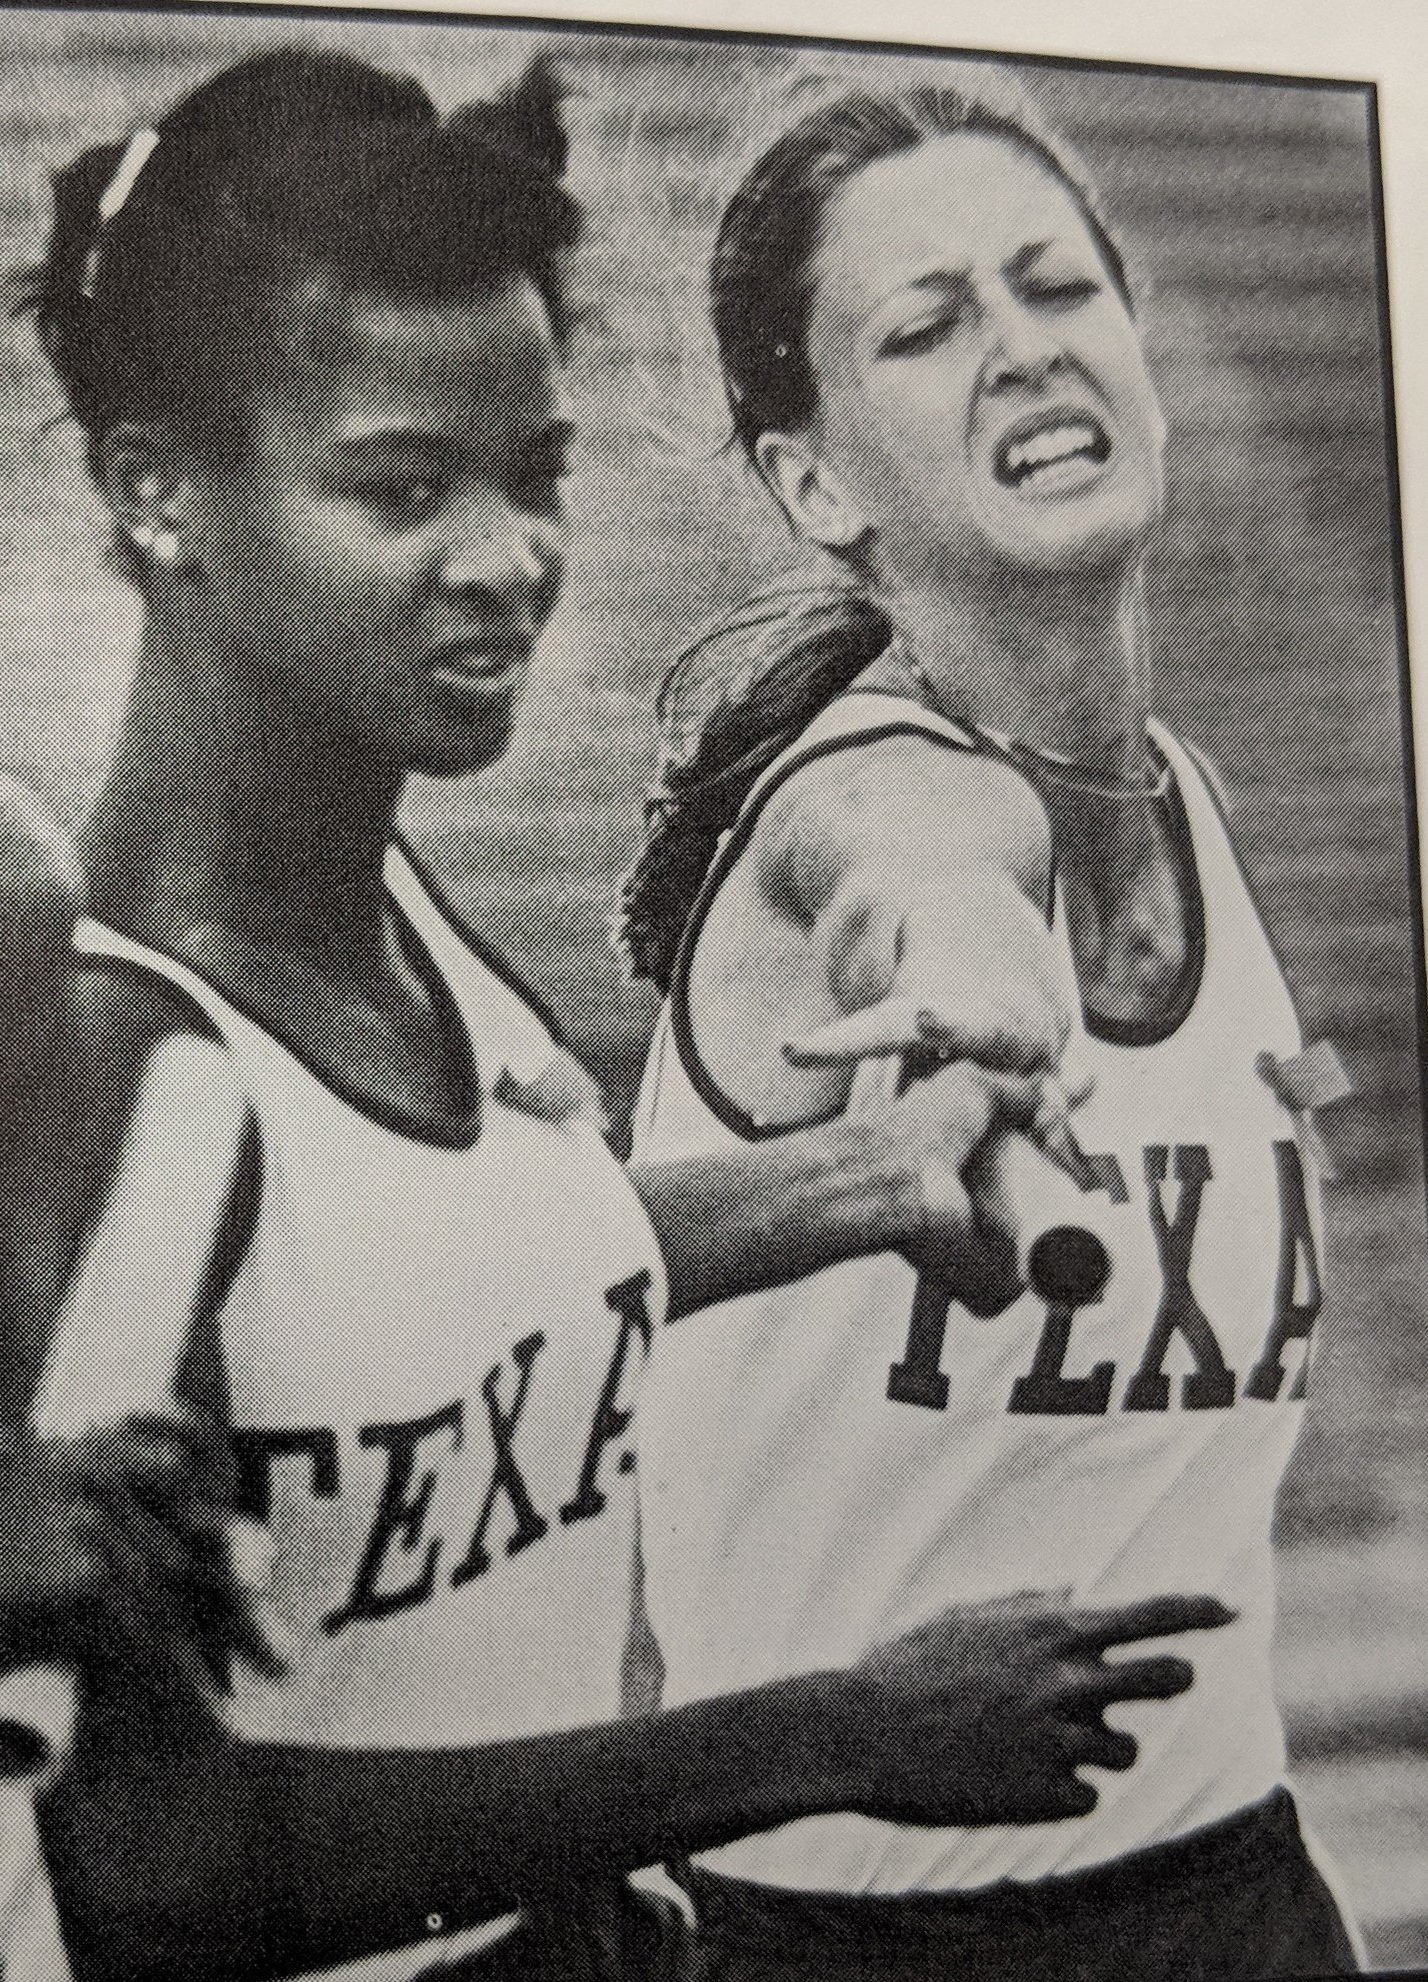  Donna Sherfield and Julie Holmes handoff in the 1600-meter relay.  Julie Holmes is recognized as a National Champion as a member of the 4  x 4000 in 1981, and she is a 5 time All-American  